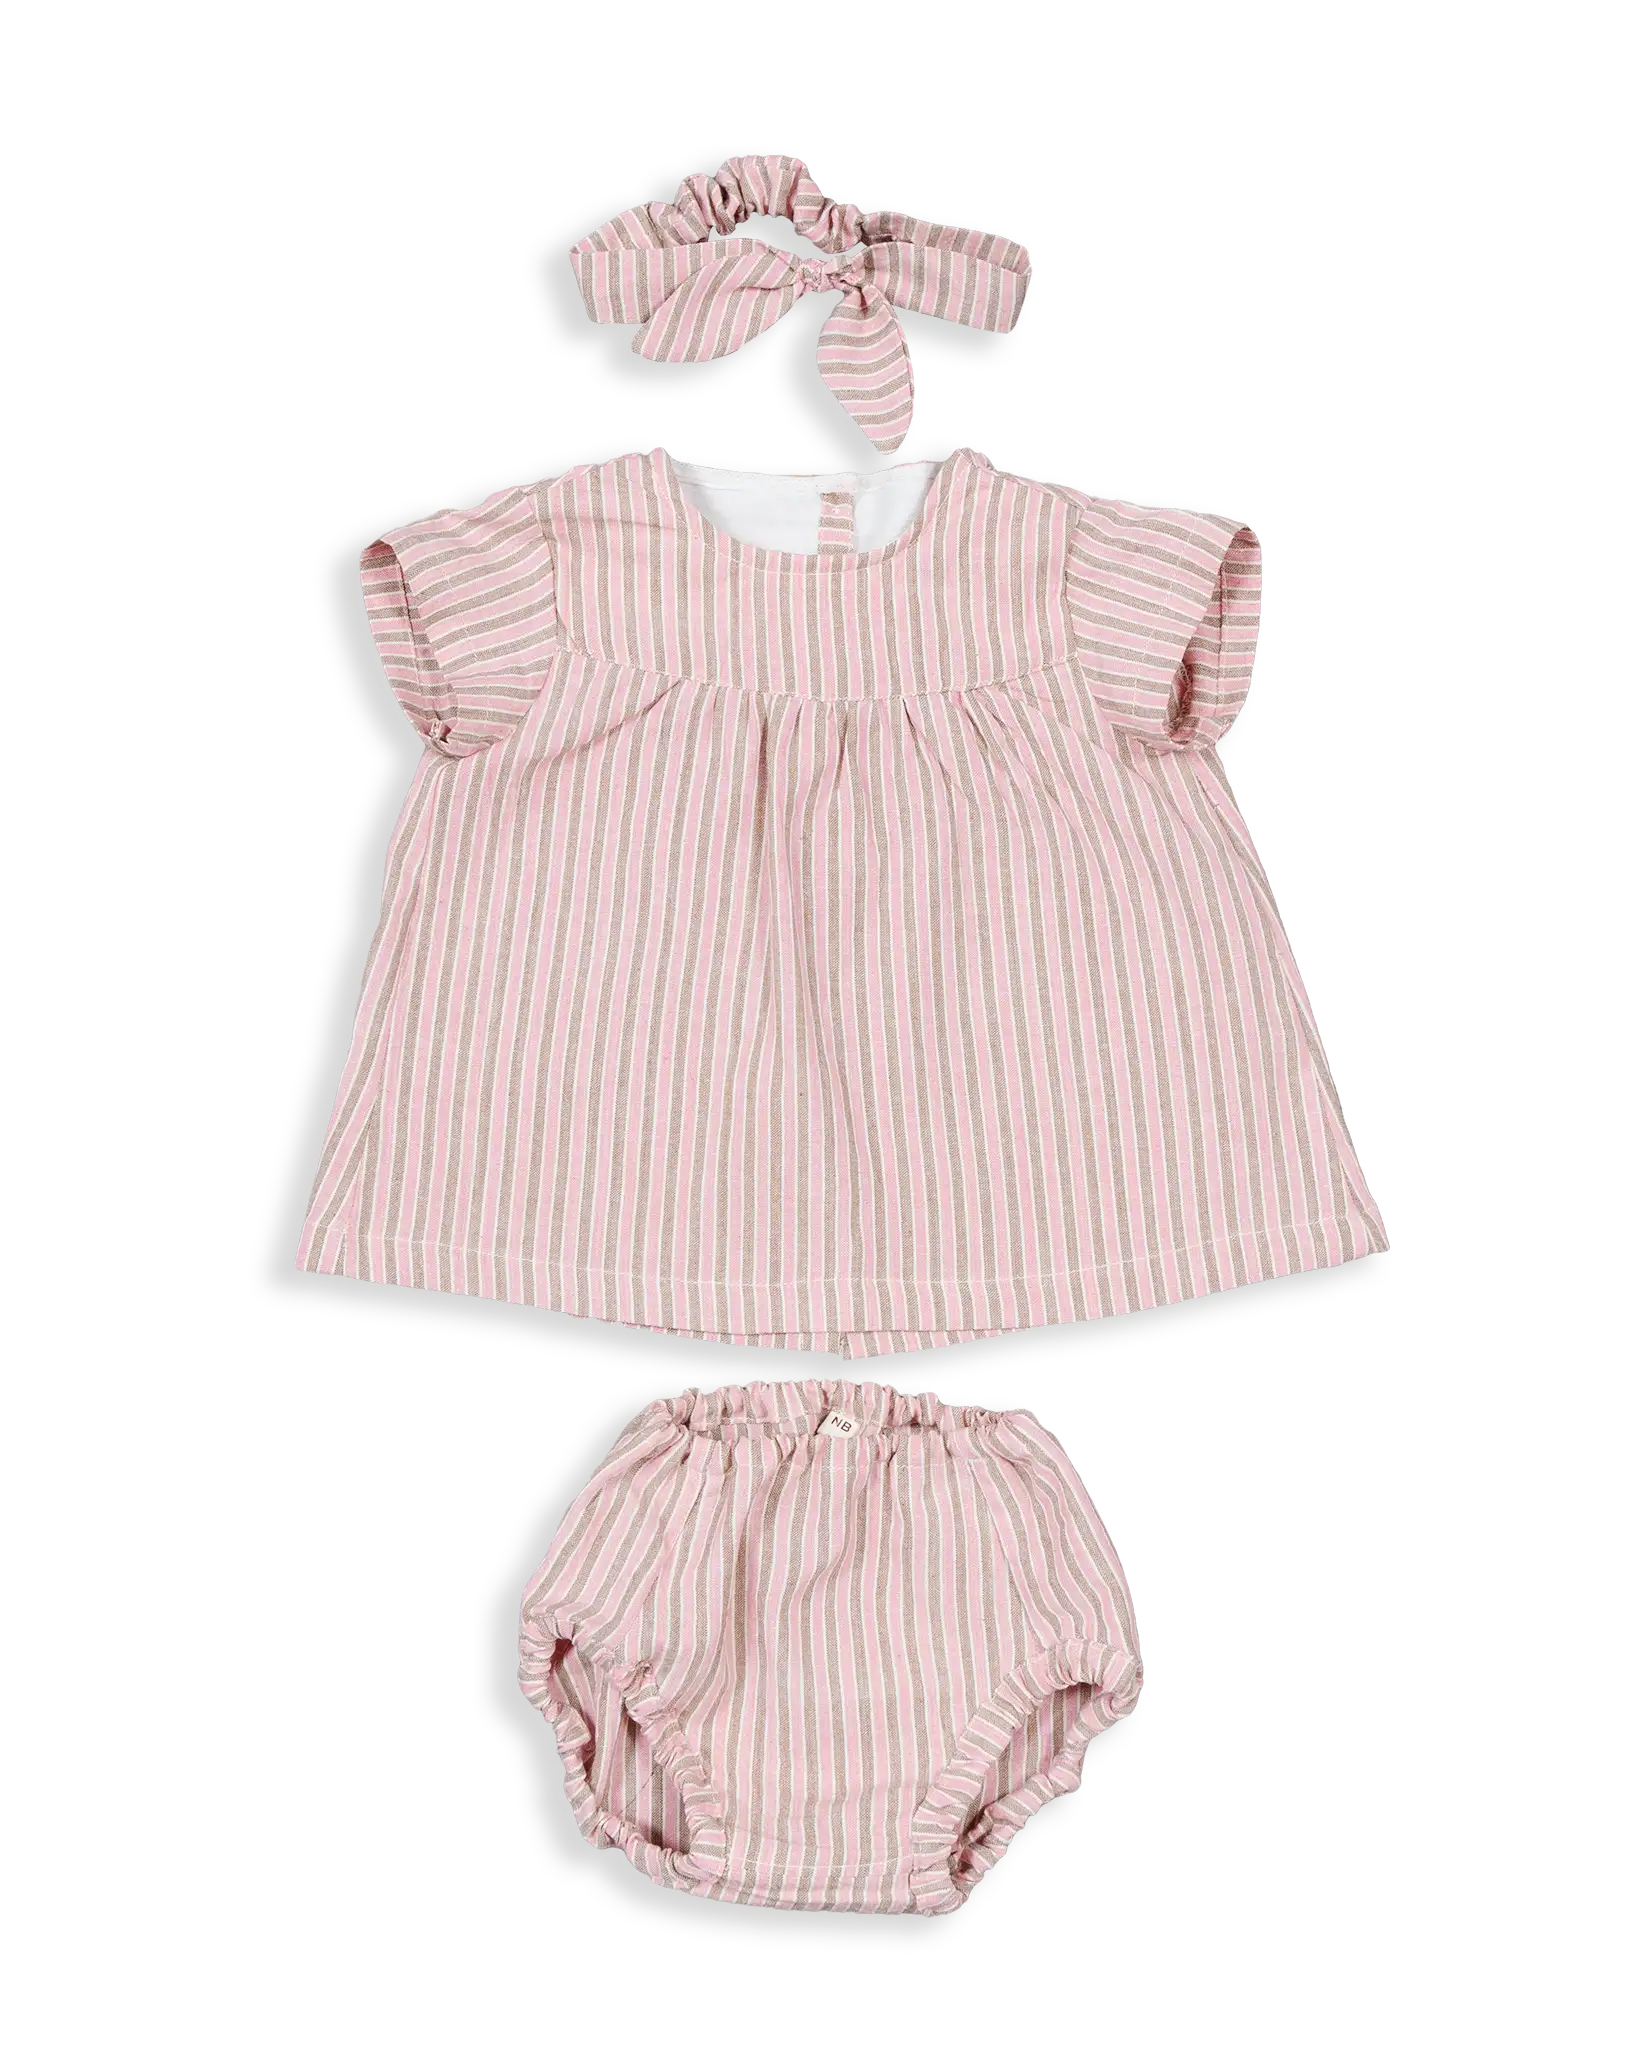 Kokroma Dress Set includes dress, bloomer, and headband. Easy to wear and very comfy design.